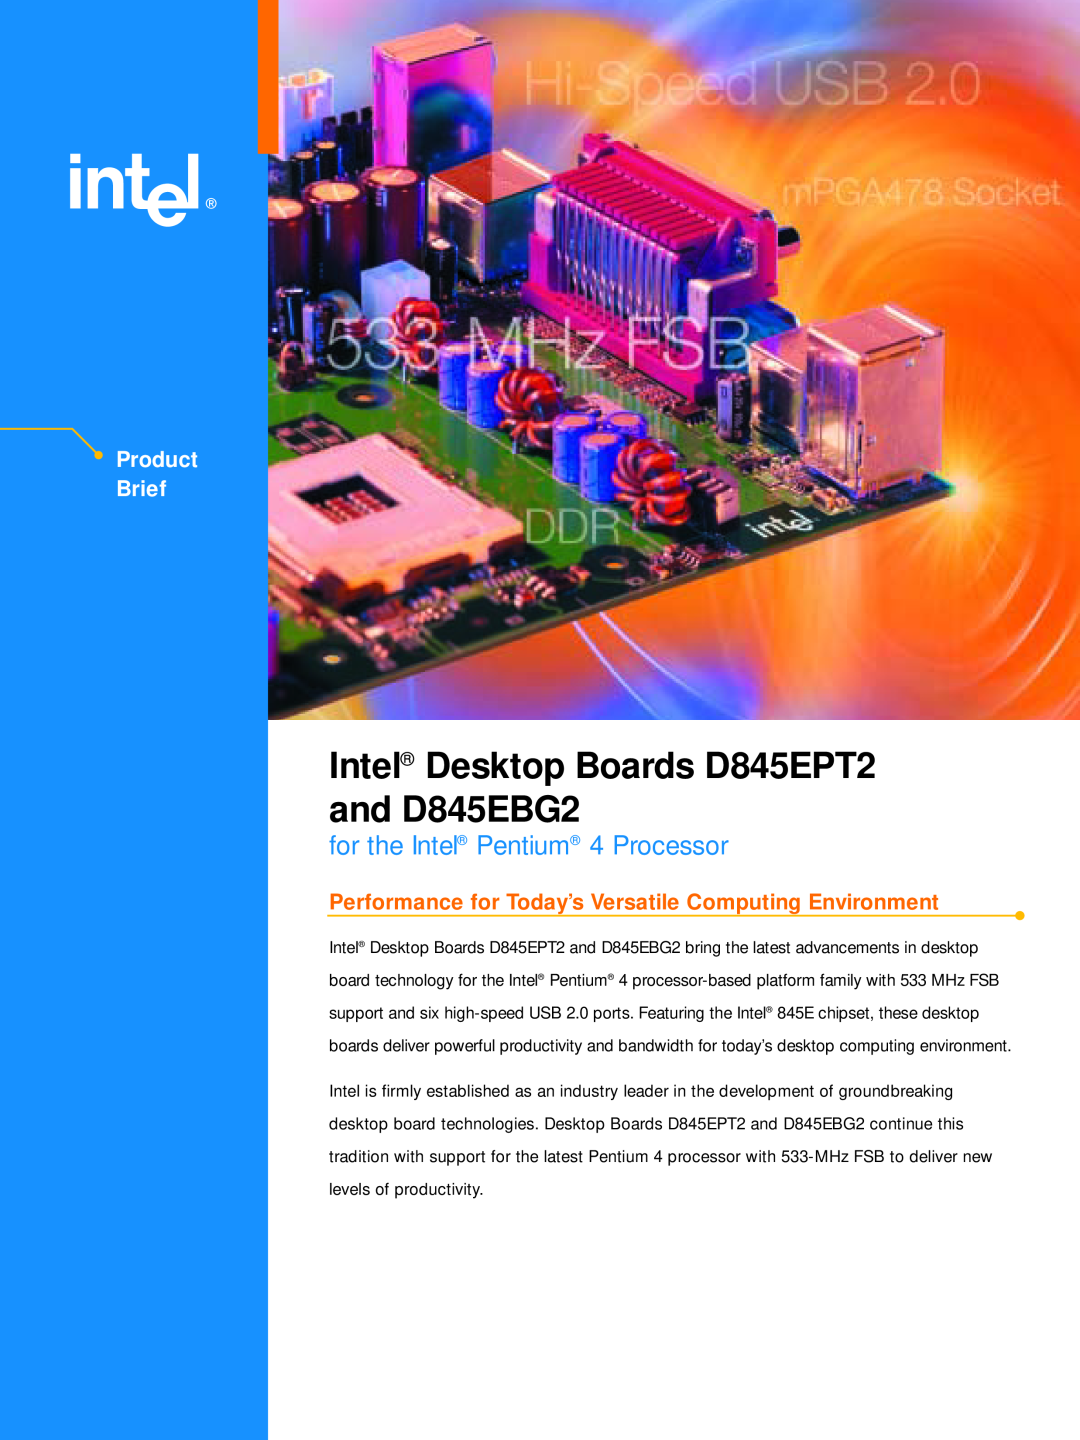 Intel manual Intel Desktop Boards D845EPT2 and D845EBG2 Product Guide, Order Number A84611-001 